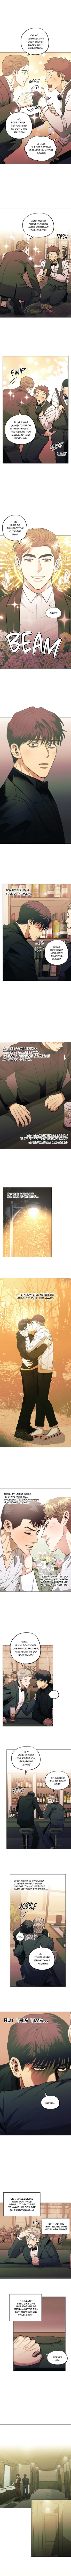 When The Killer Falls In Love - Page 2